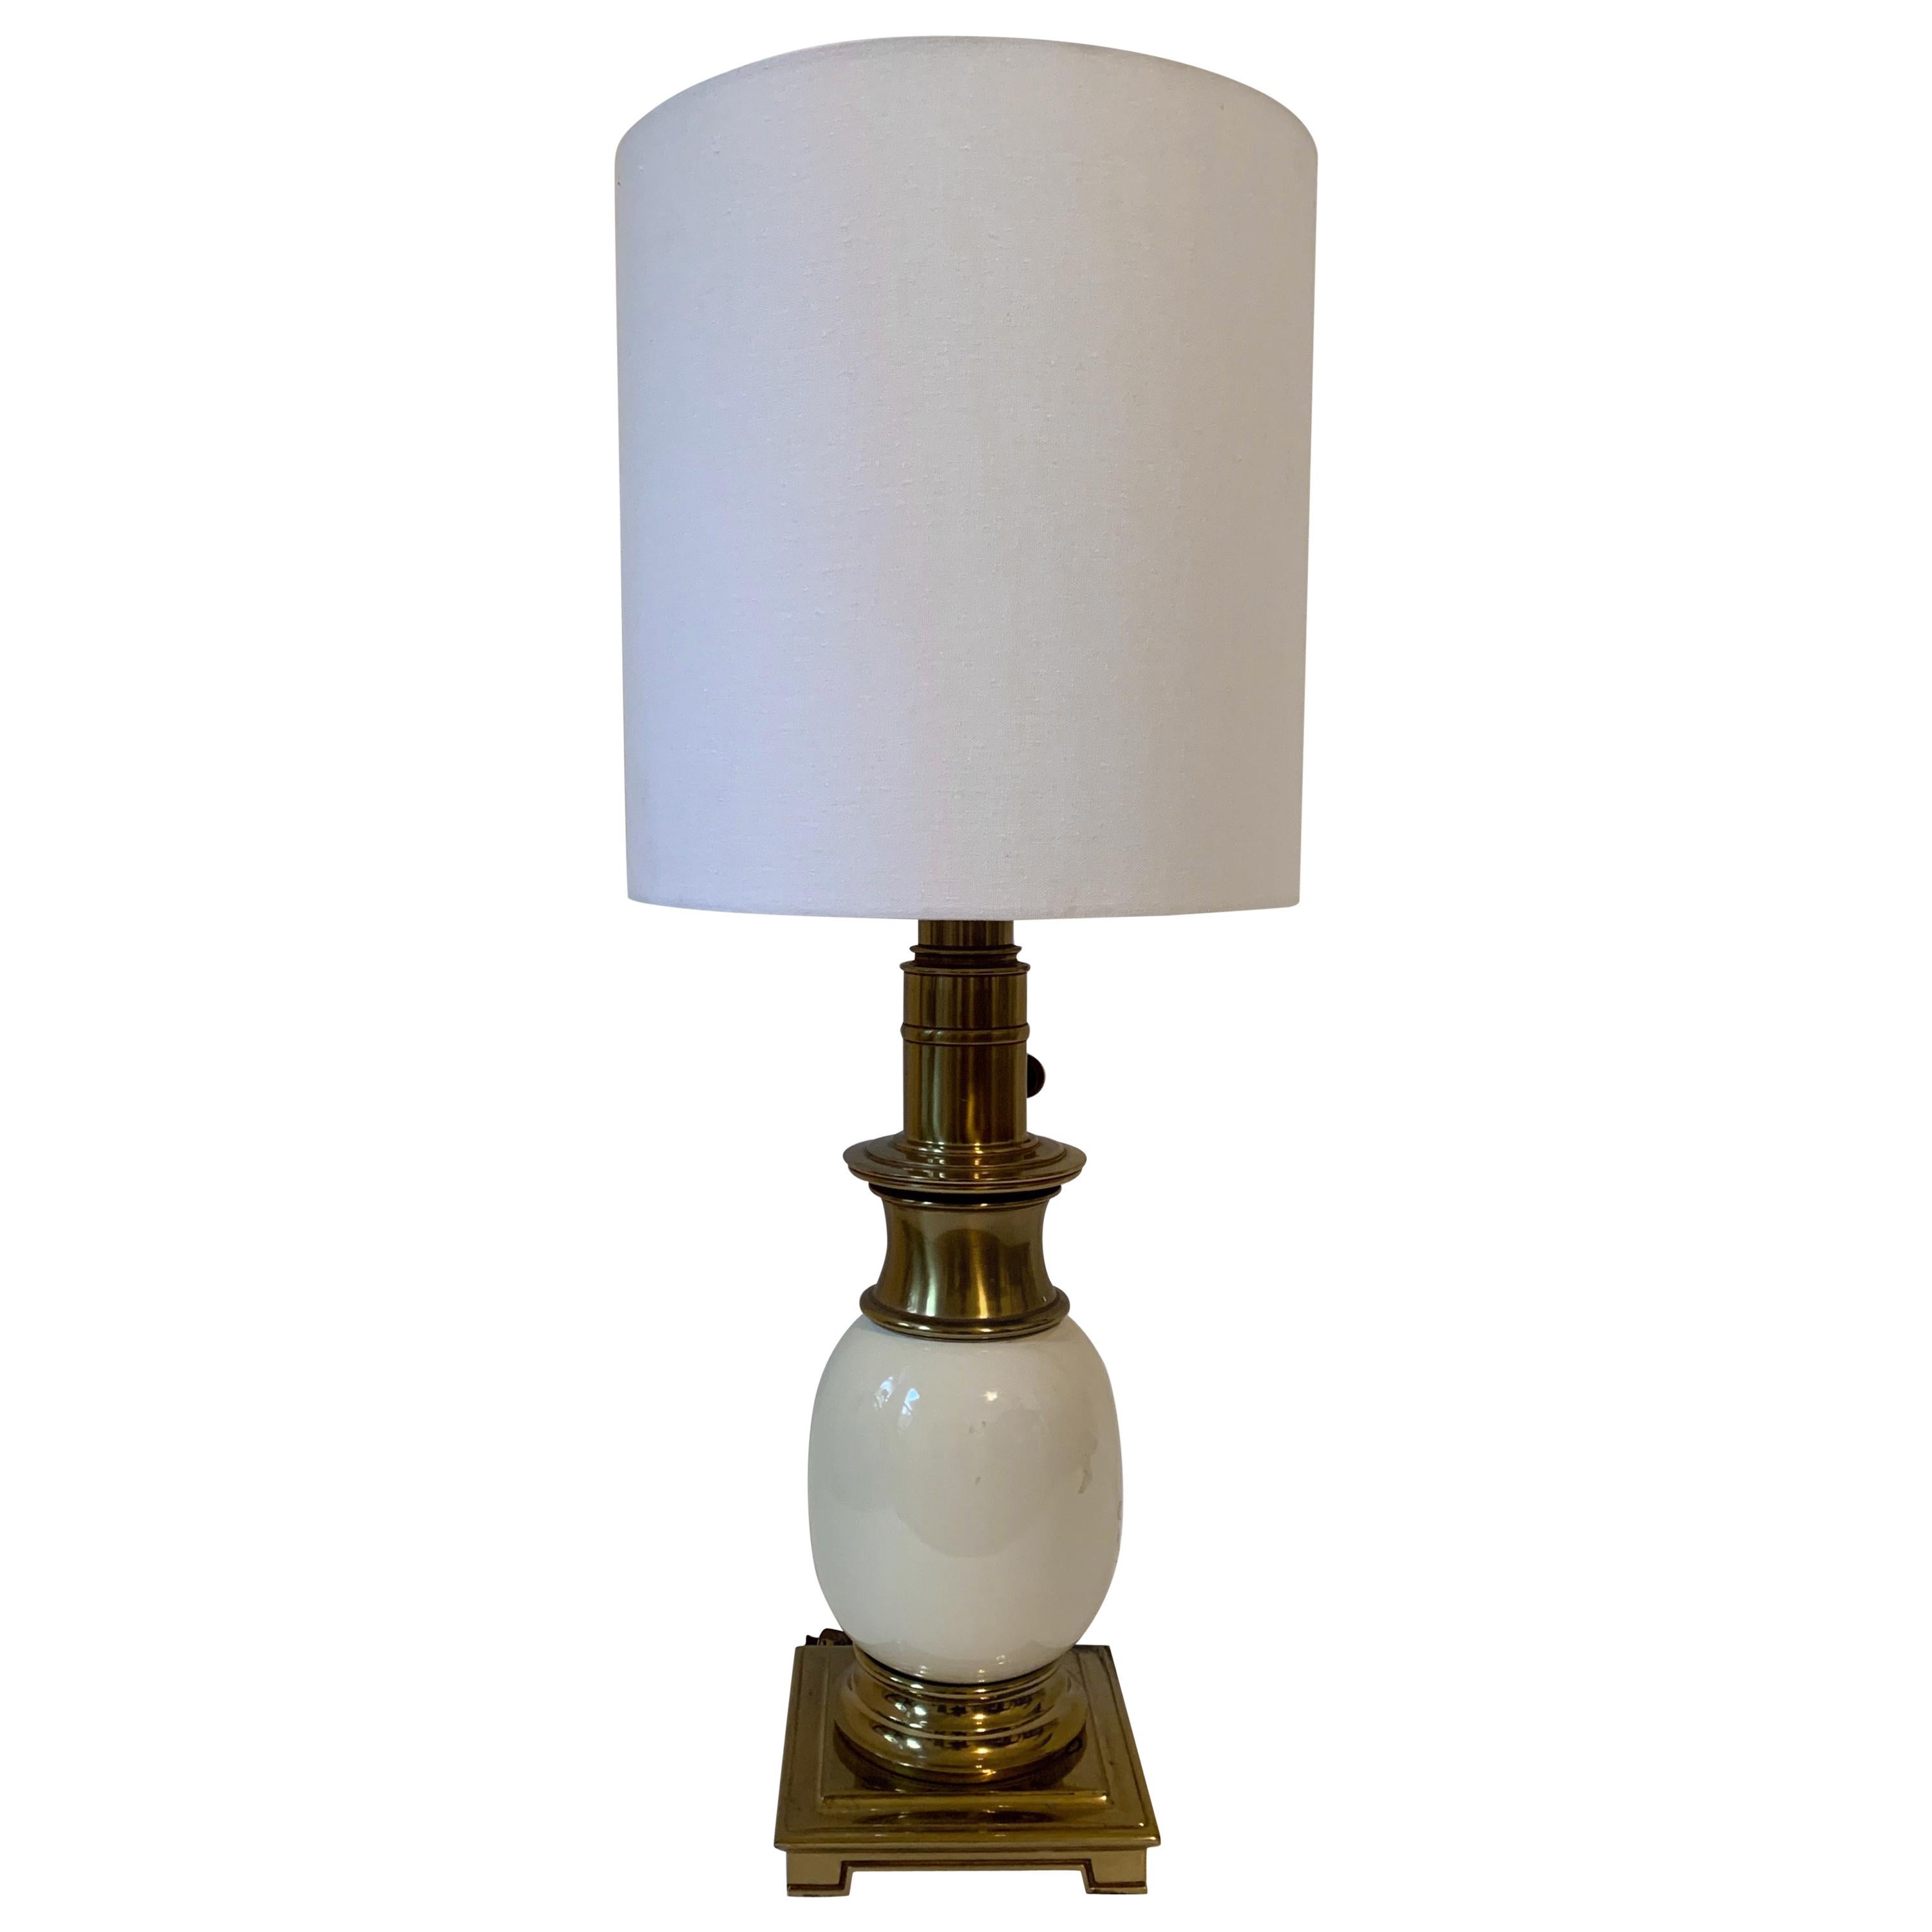 Brass Table Lamp By Stiffel, Old Stiffel Table Lamps